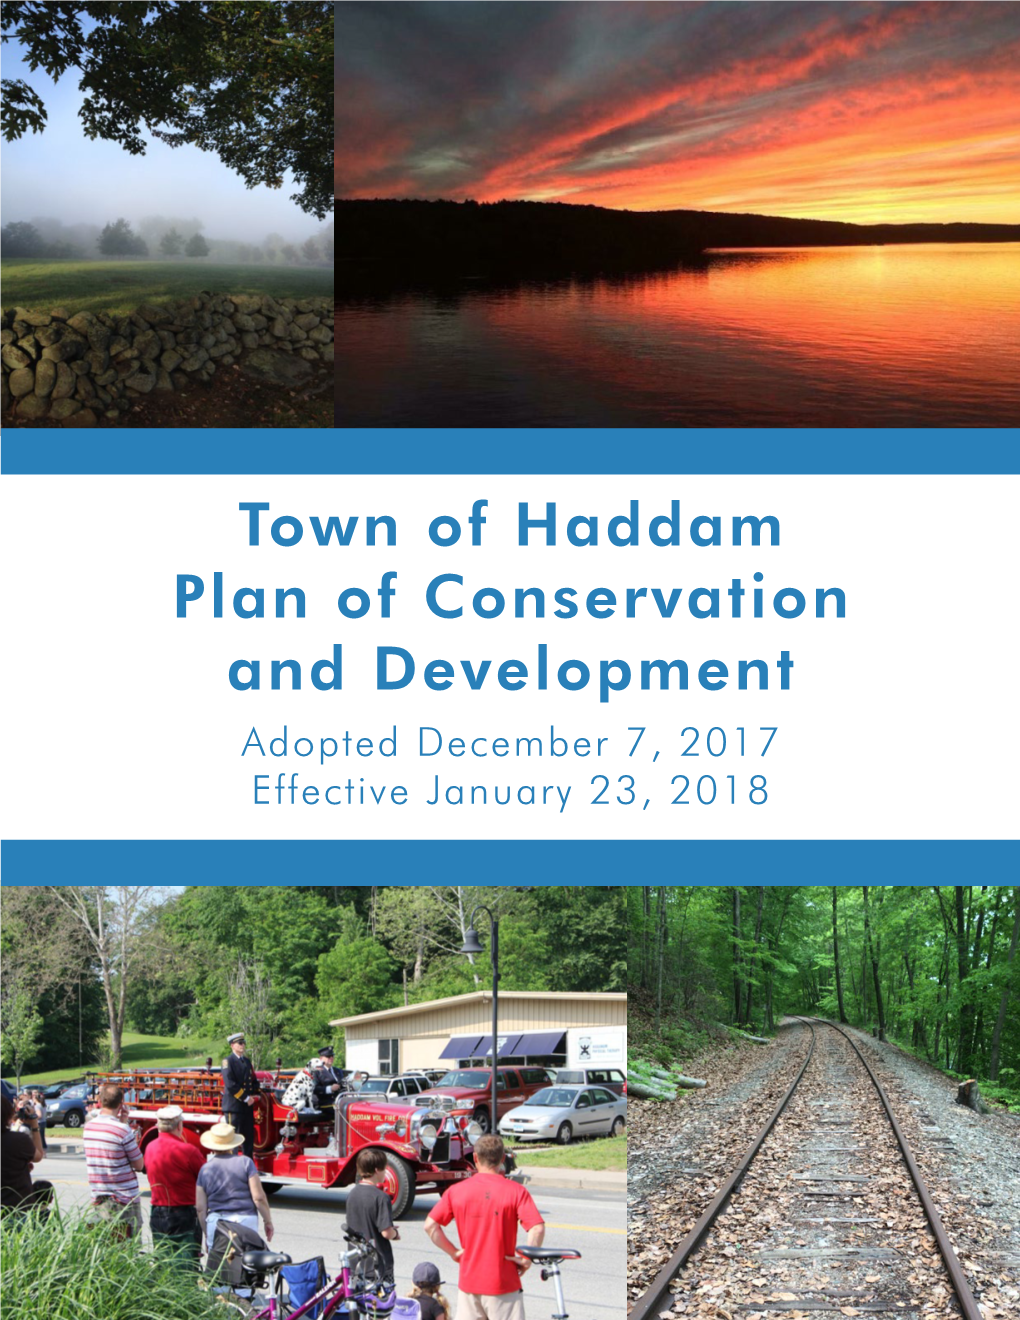 Town of Haddam Plan of Conservation and Development